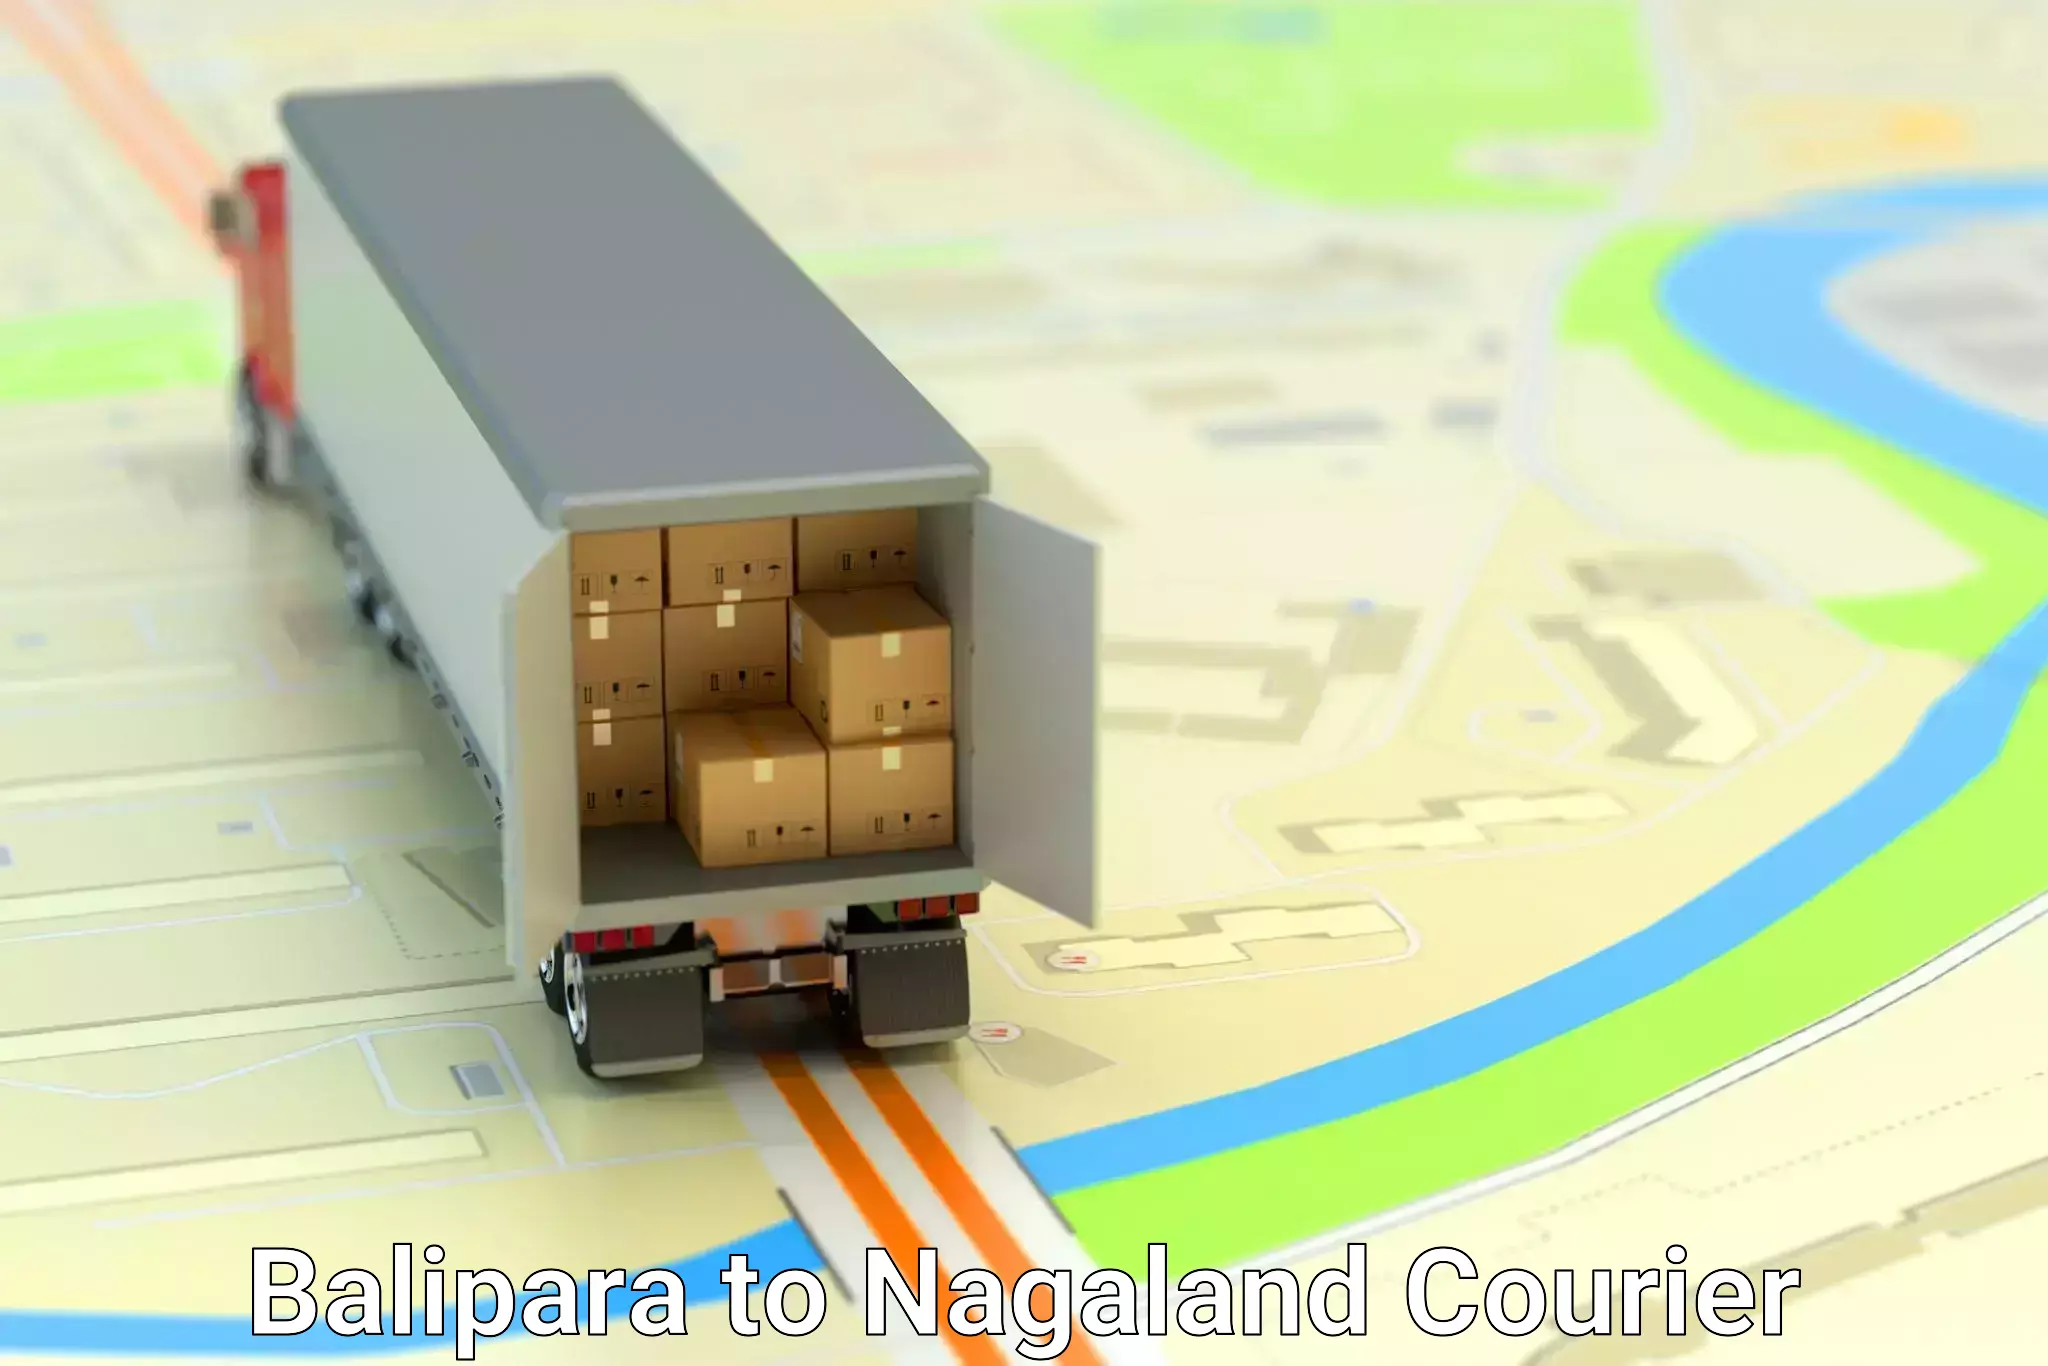 State-of-the-art courier technology Balipara to Nagaland